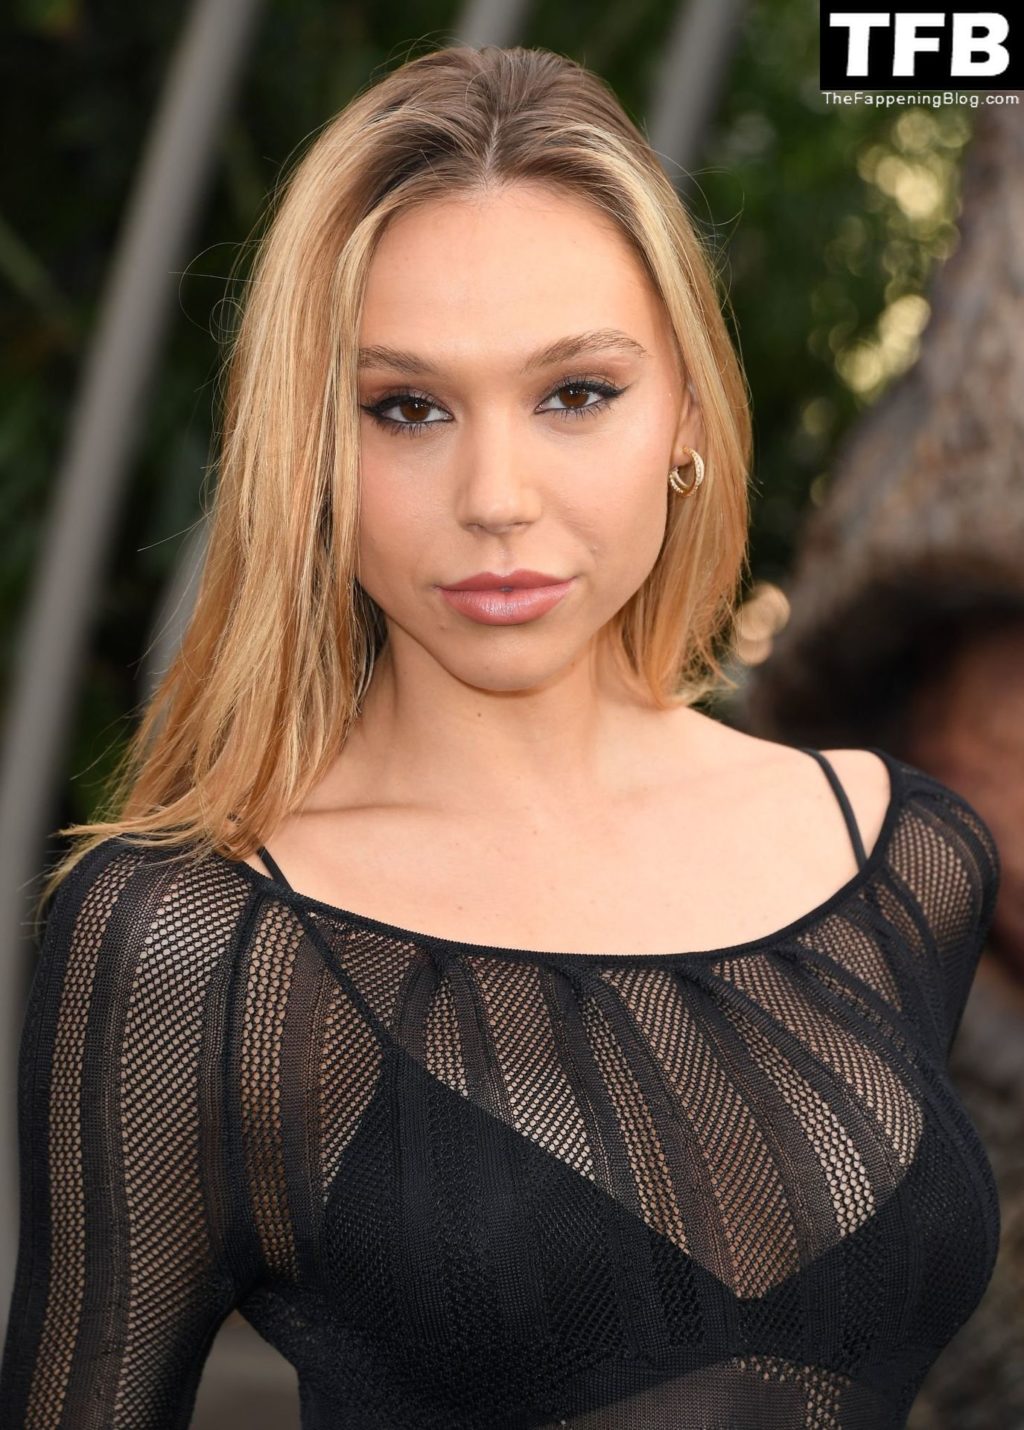 Alexis Ren Displays Her Slender Figure in a See-Through Dress at the “Jurassic World: Dominion” Premiere (41 Photos)